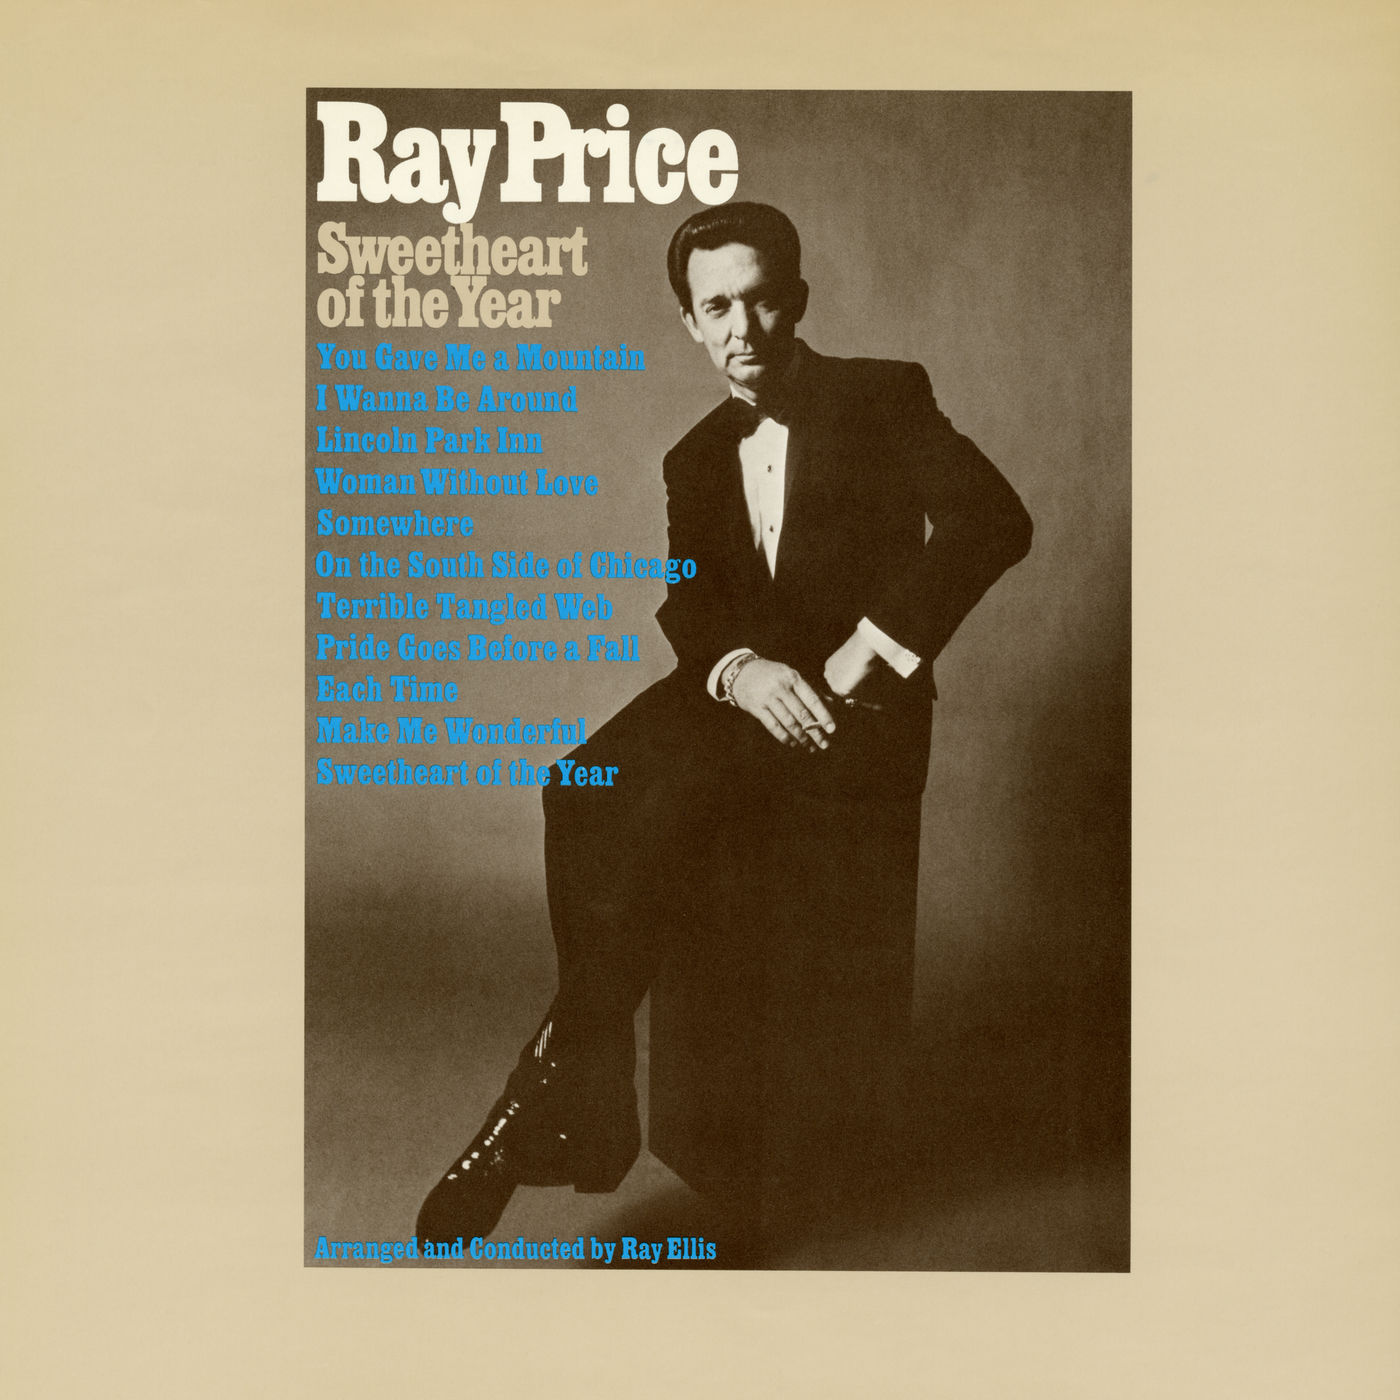 Ray Price – Sweetheart of the Year